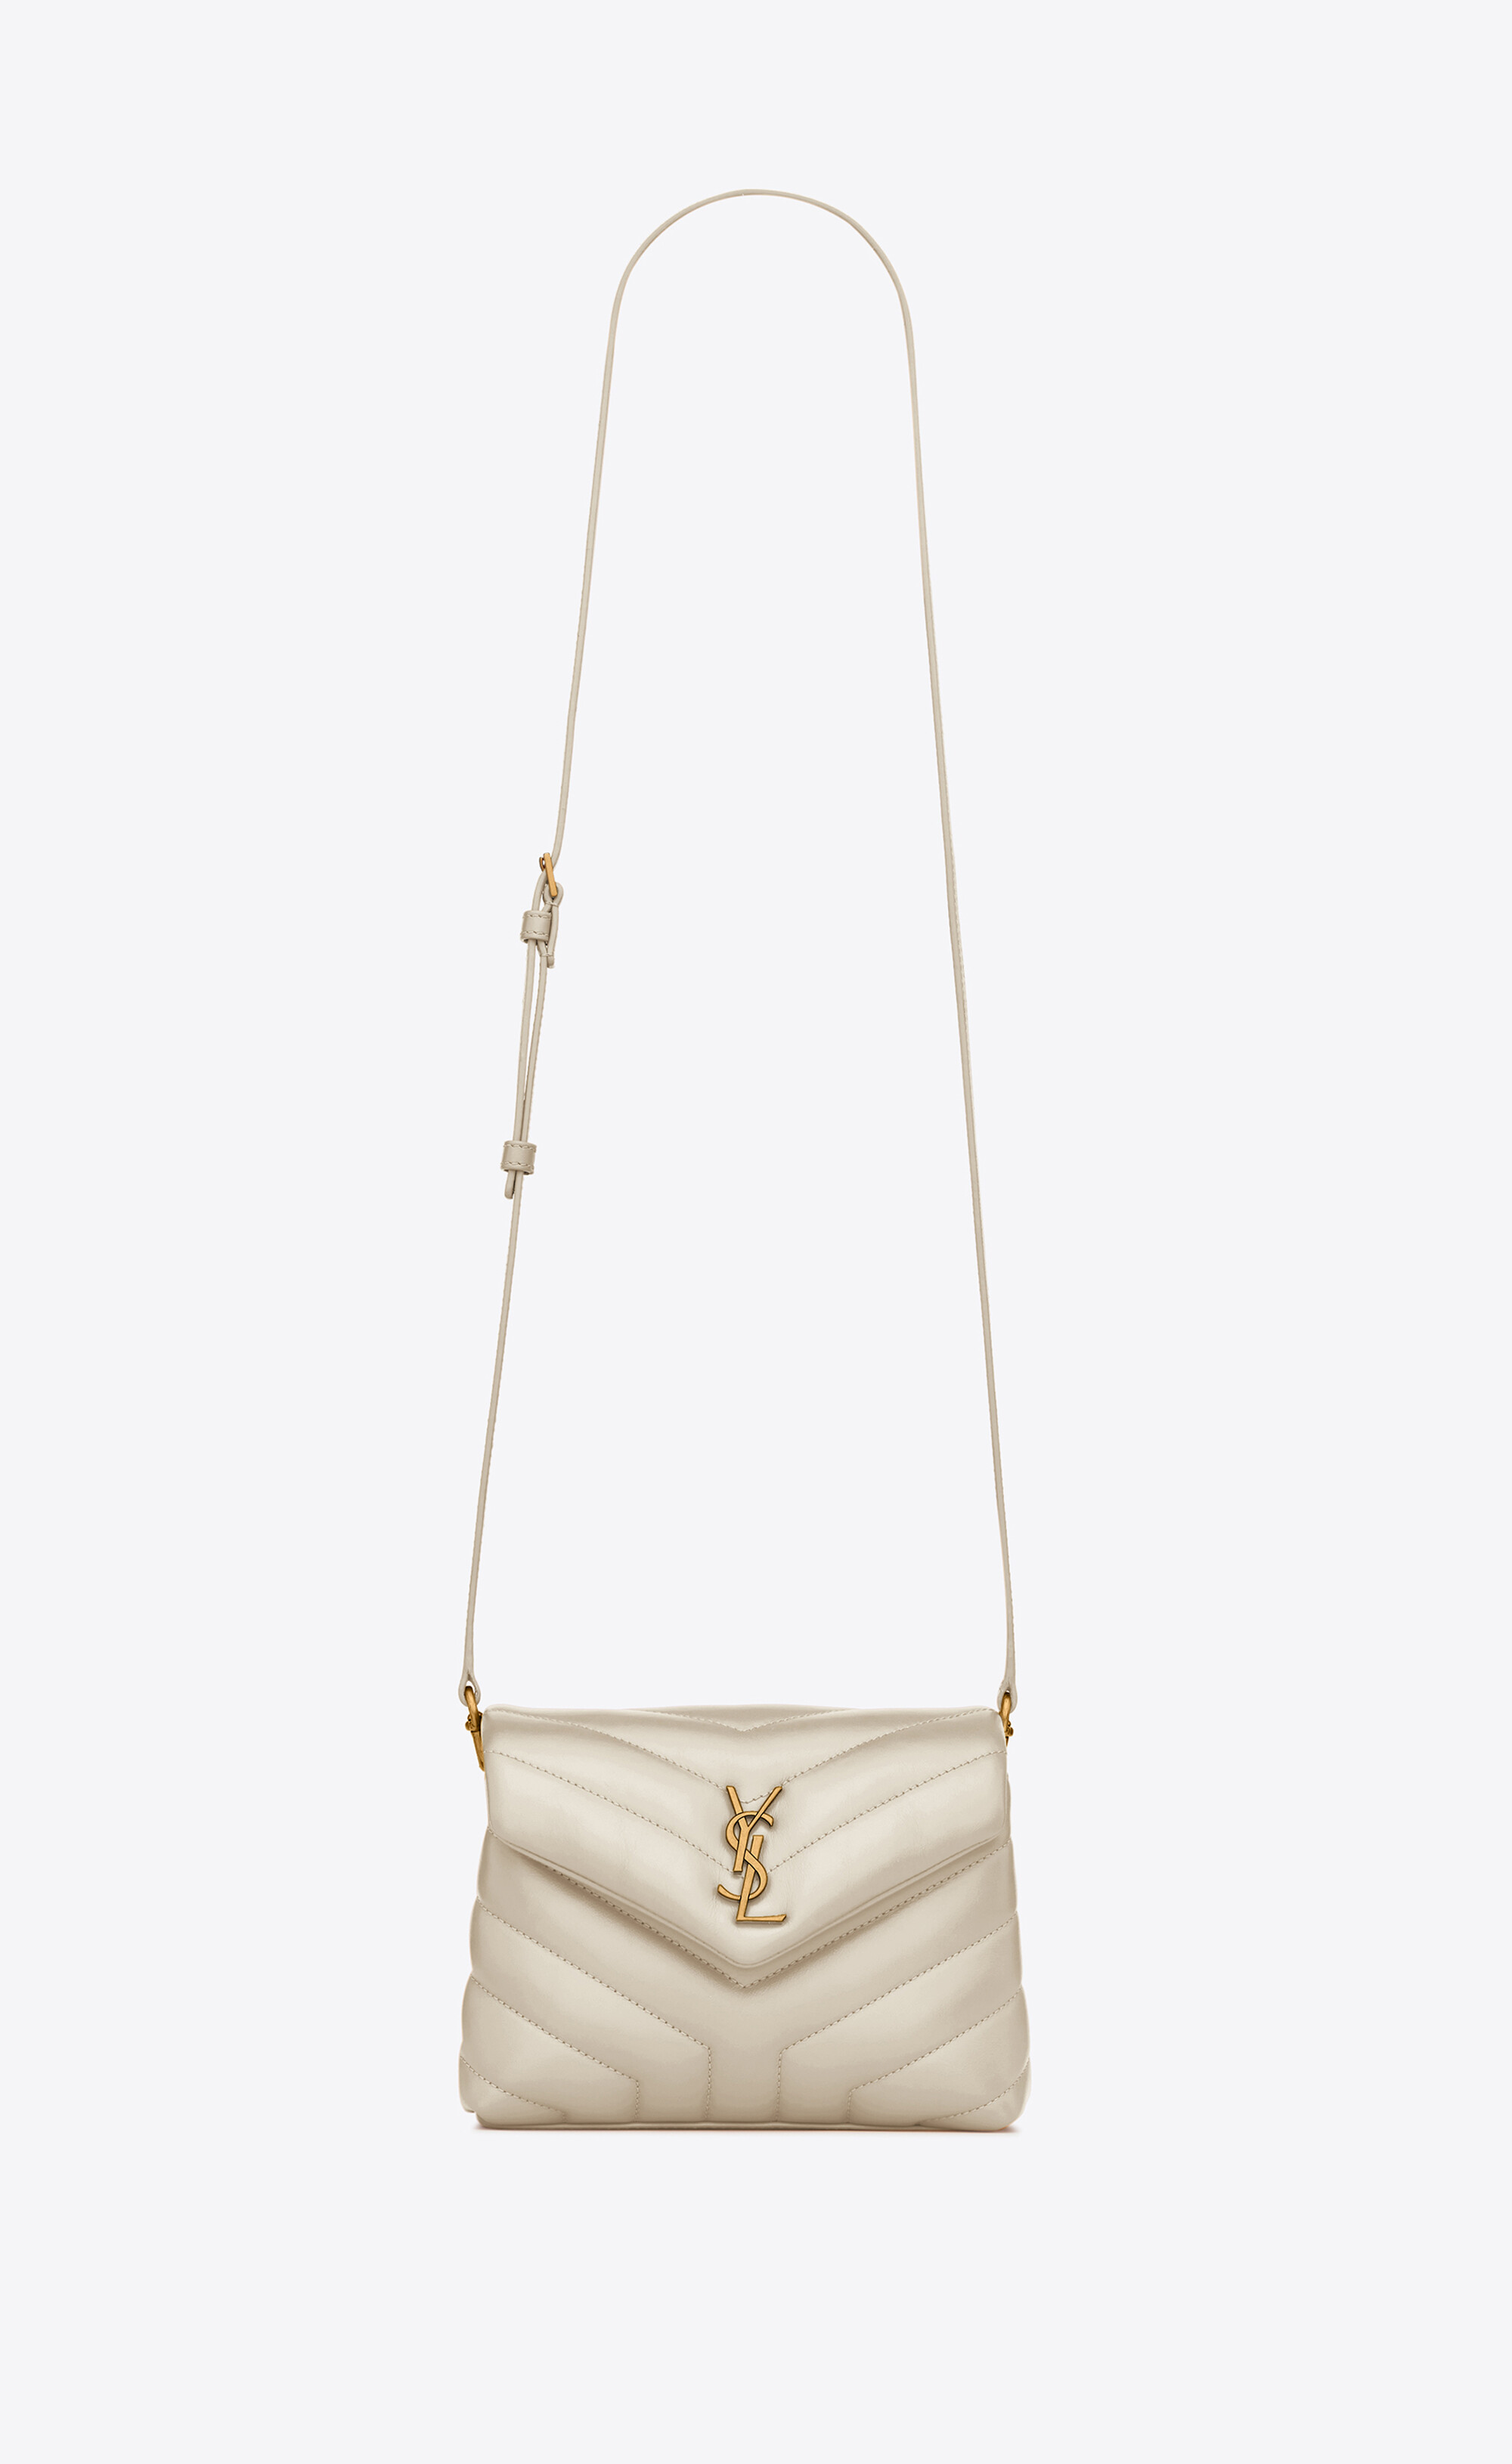 Saint Laurent LouLou Toy YSL … curated on LTK